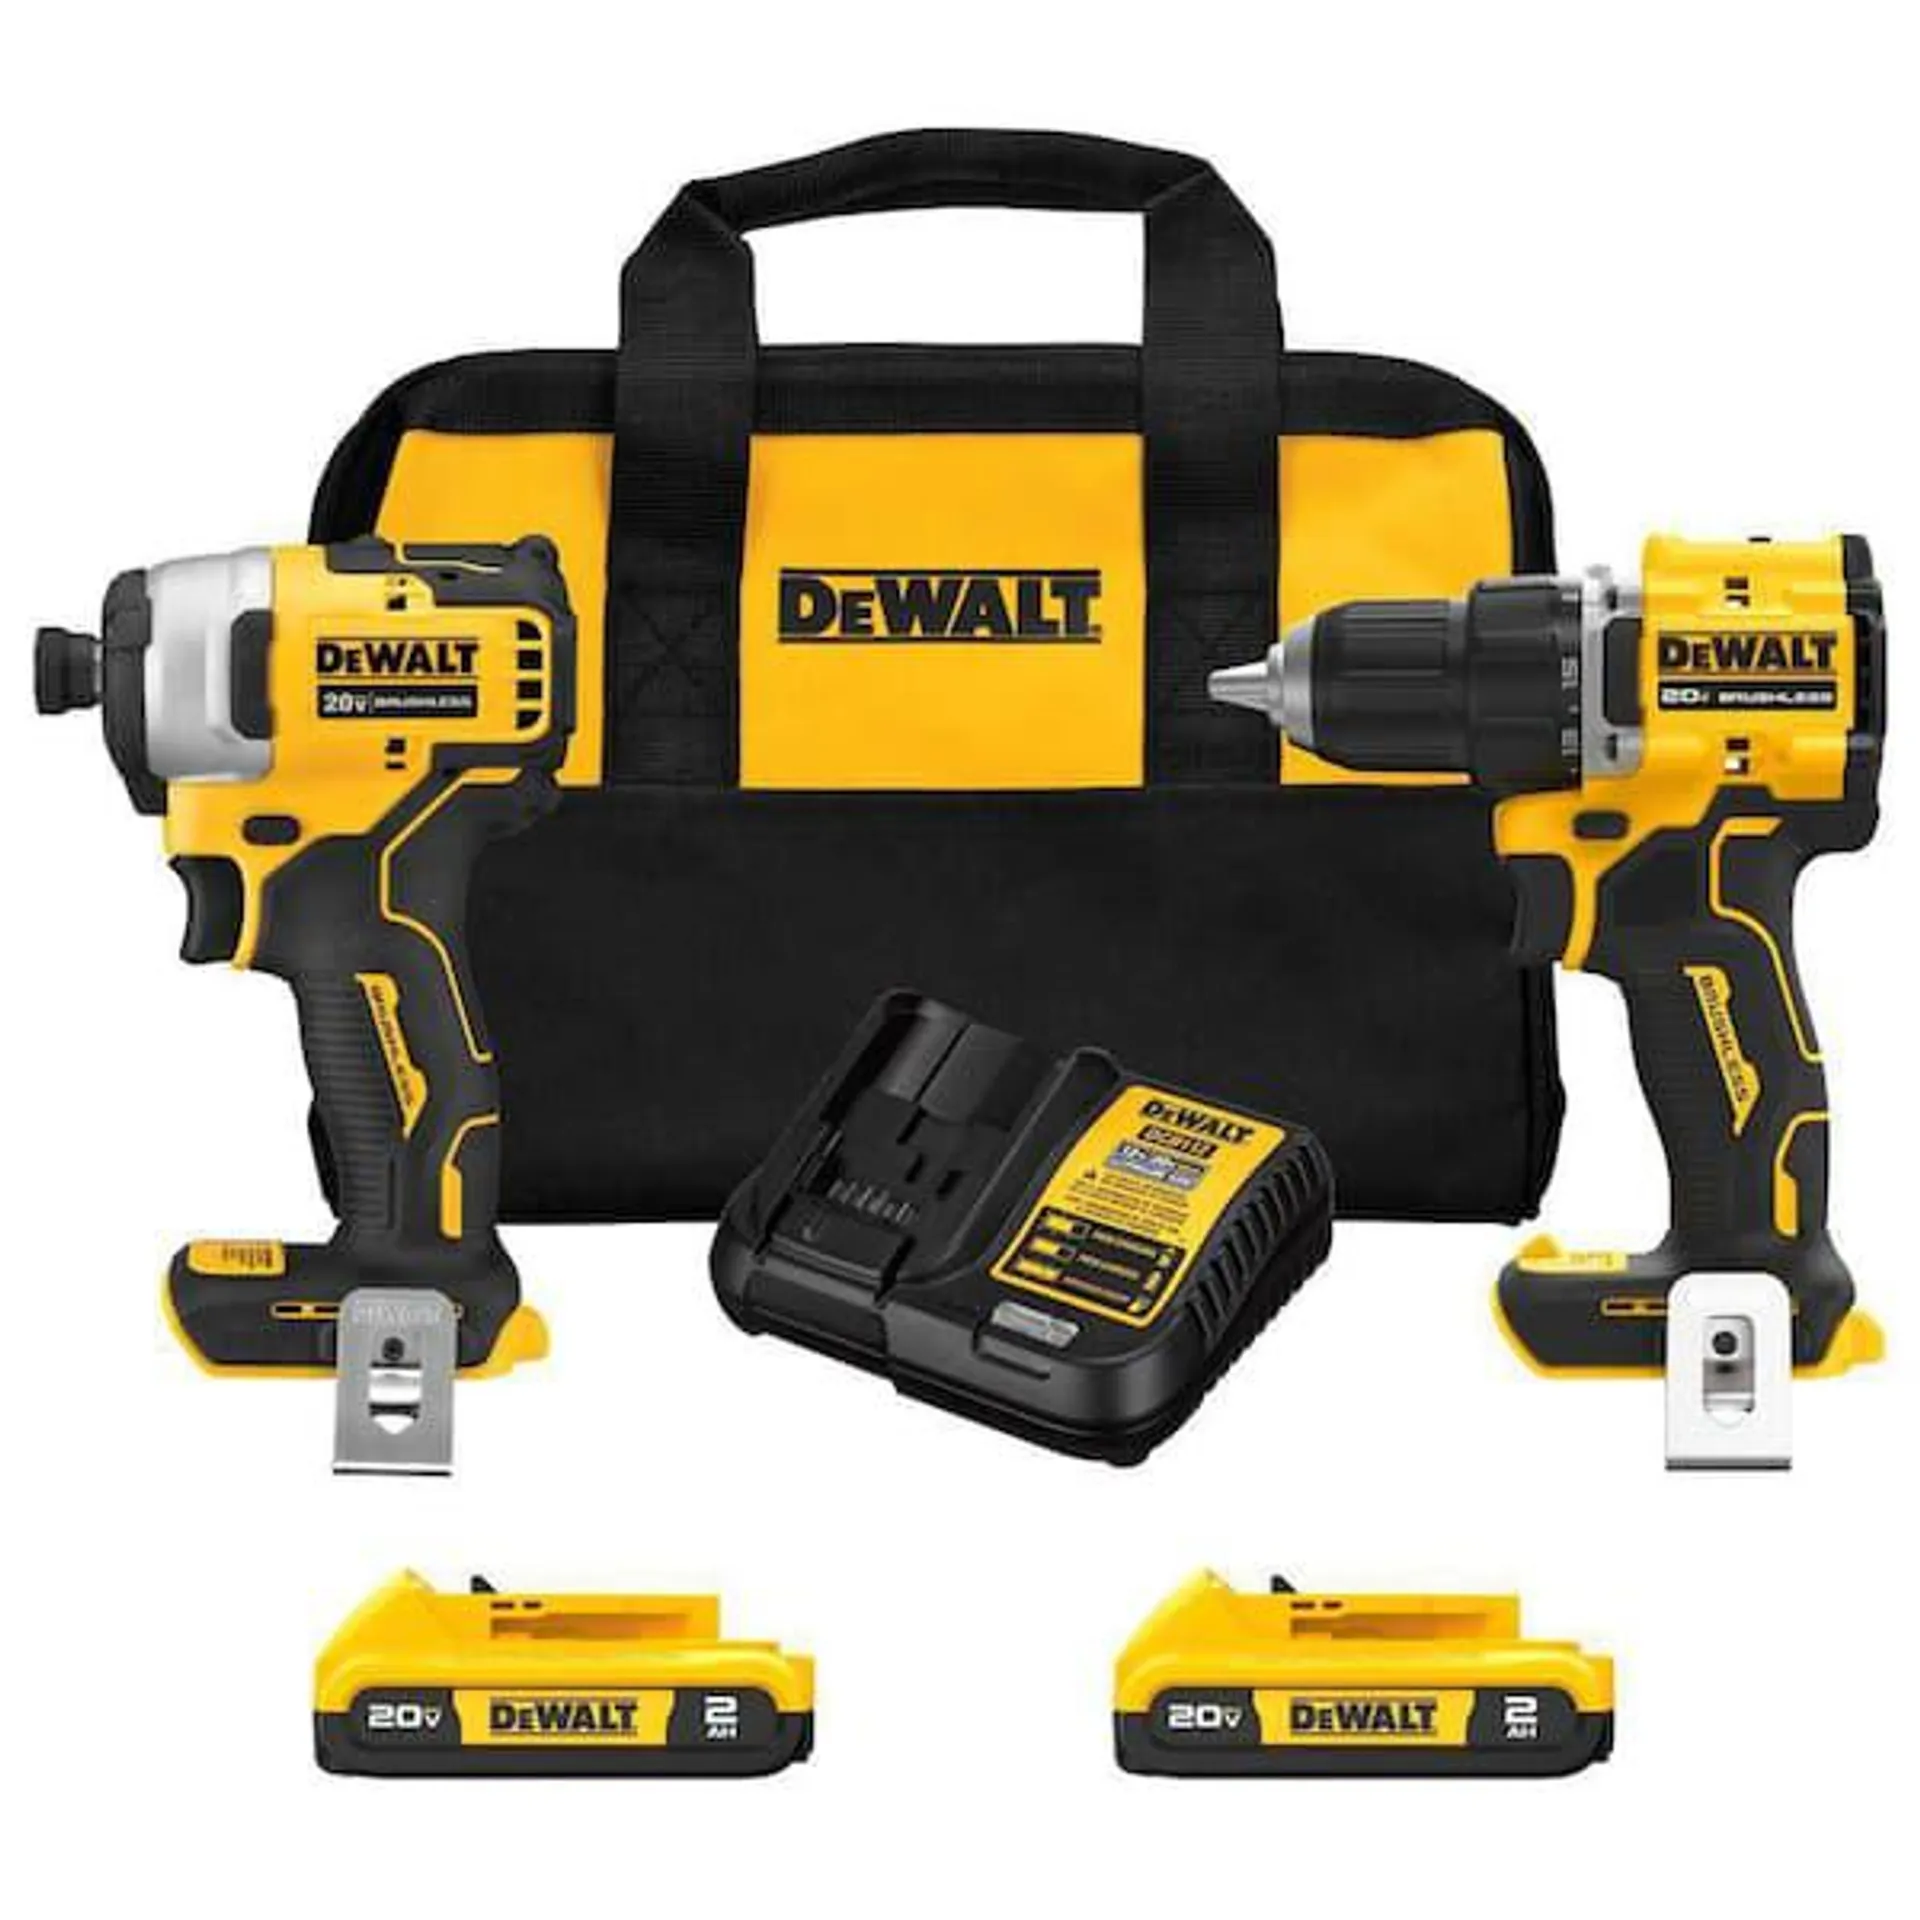 ATOMIC 20-Volt MAX Lithium-Ion Cordless Combo Kit (2-Tool) with (2) 2.0Ah Batteries, Charger and Bag